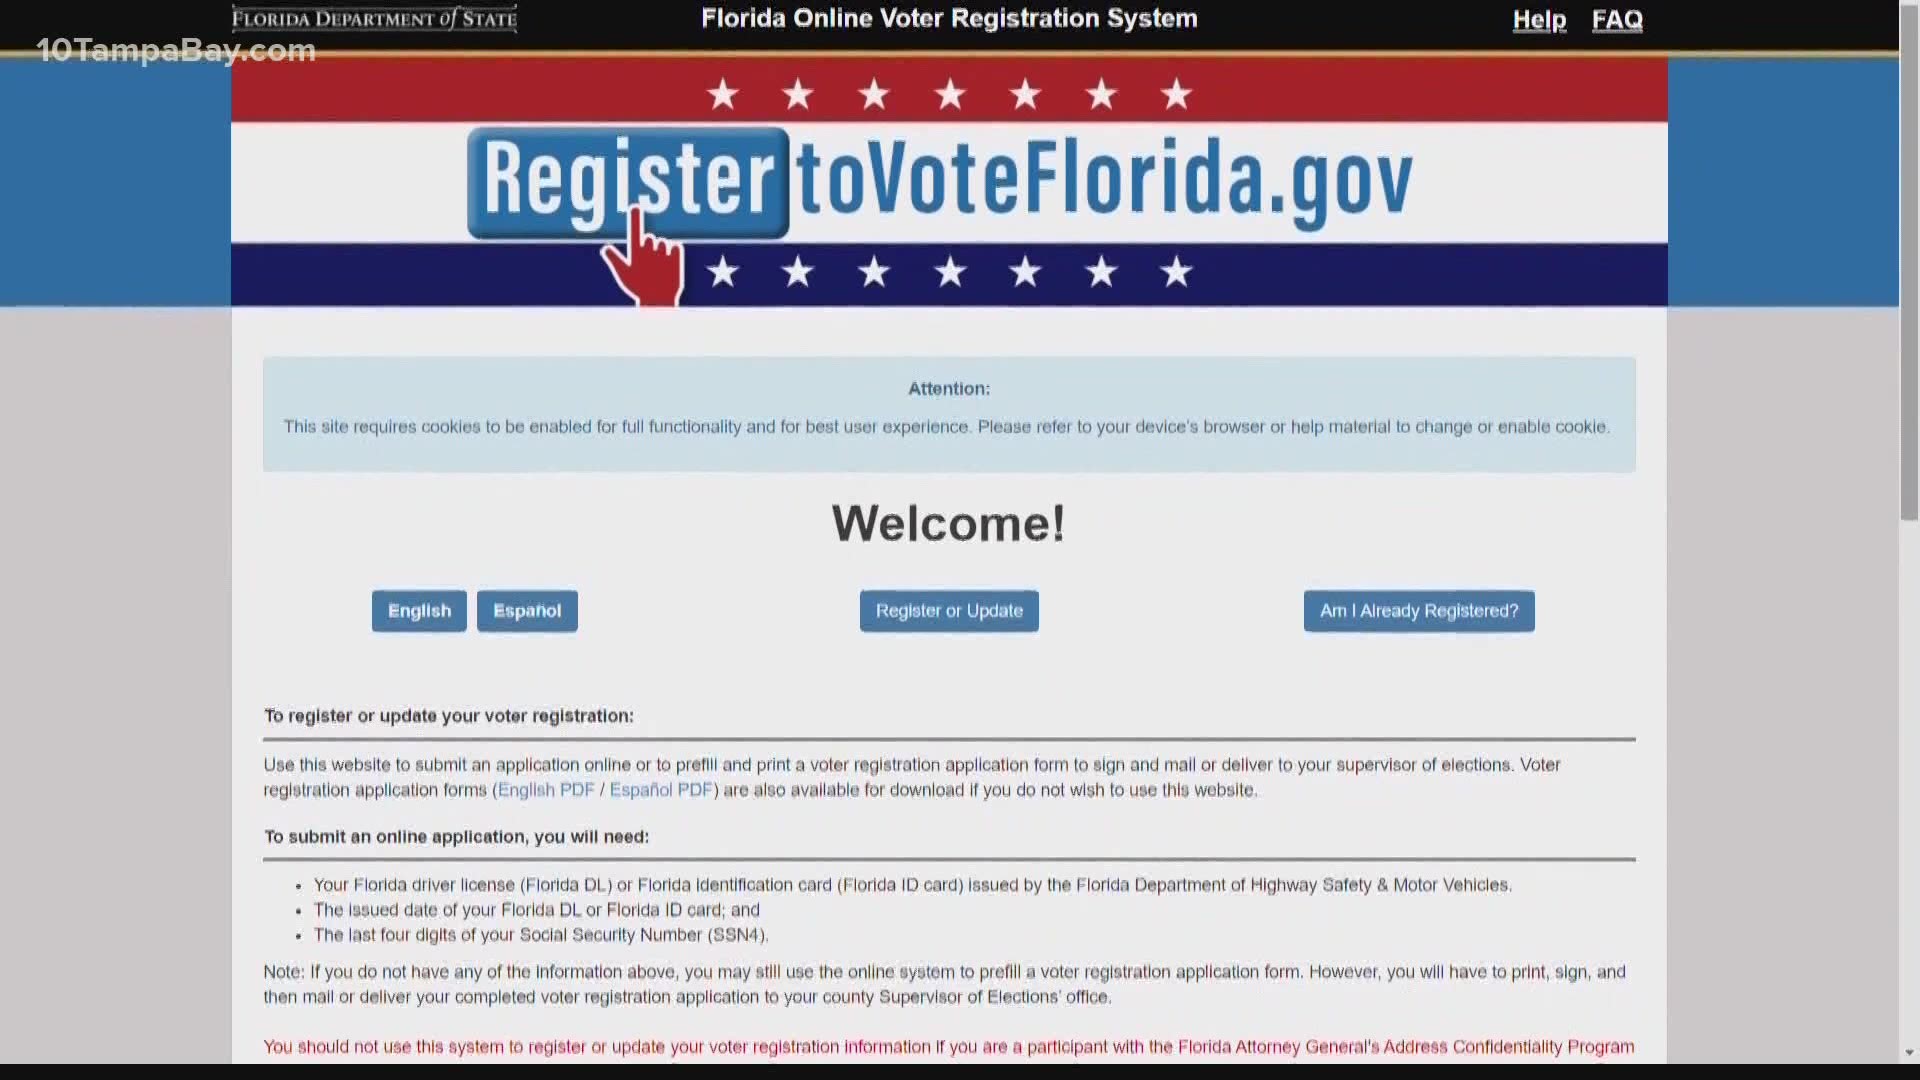 A federal judge will rule Thursday on whether to extend the Florida voter registration deadline.